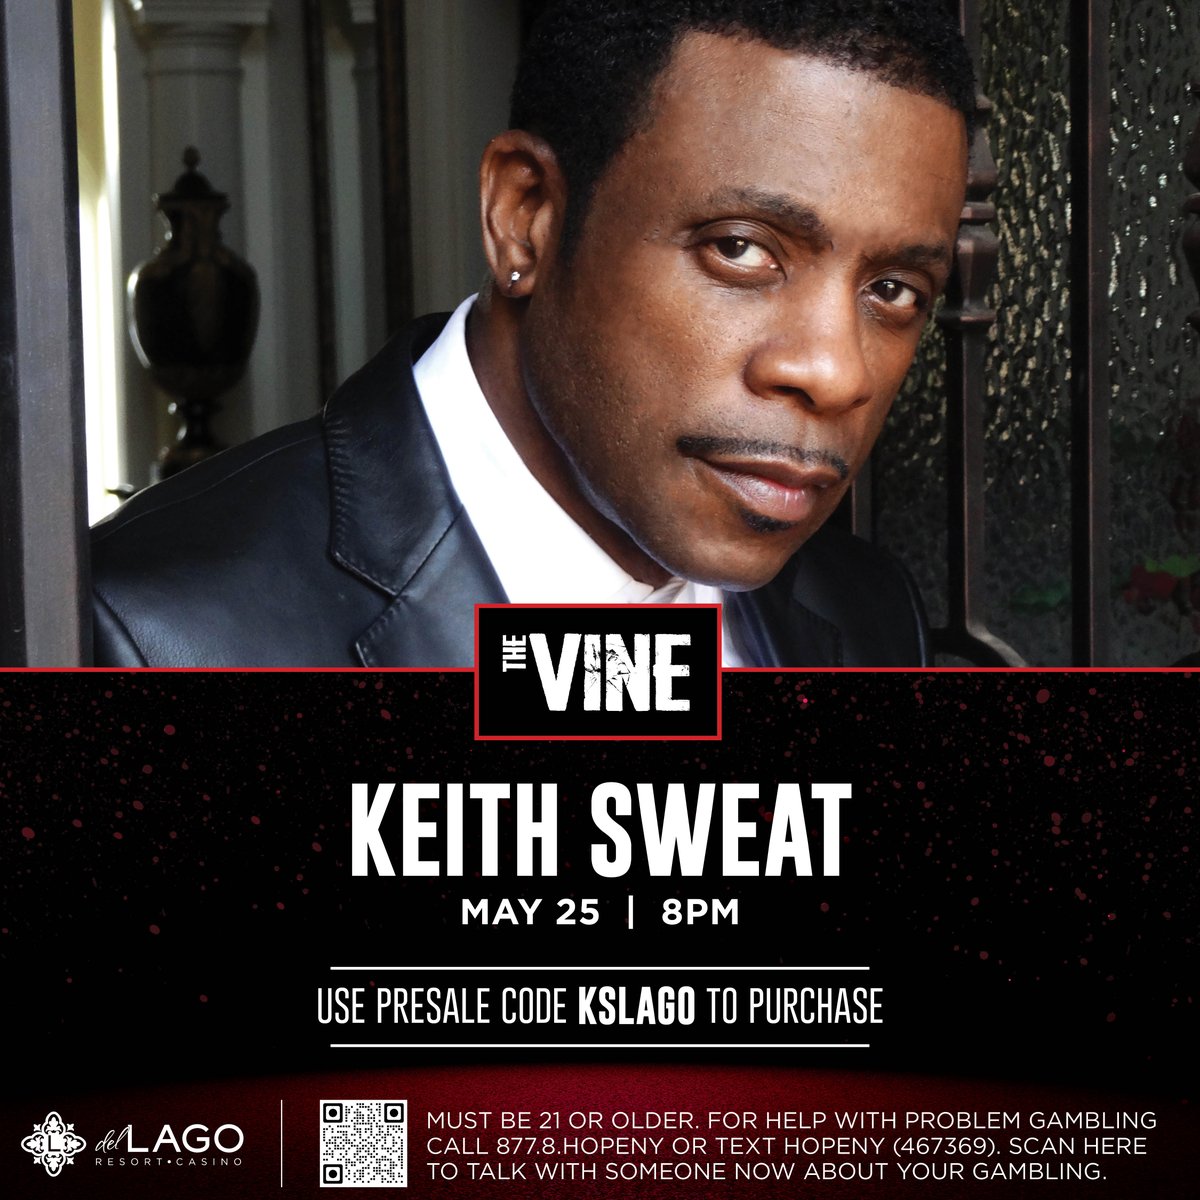 PRESALE STARTS NOW! 🎟️ Use code 'KSLAGO' to grab your tickets for Keith Sweat on Saturday, May 25 at 8PM. Presale closes at 9AM this Friday. #delLagoNY #AtTheVine Click here for your tickets: loom.ly/6mgAURo